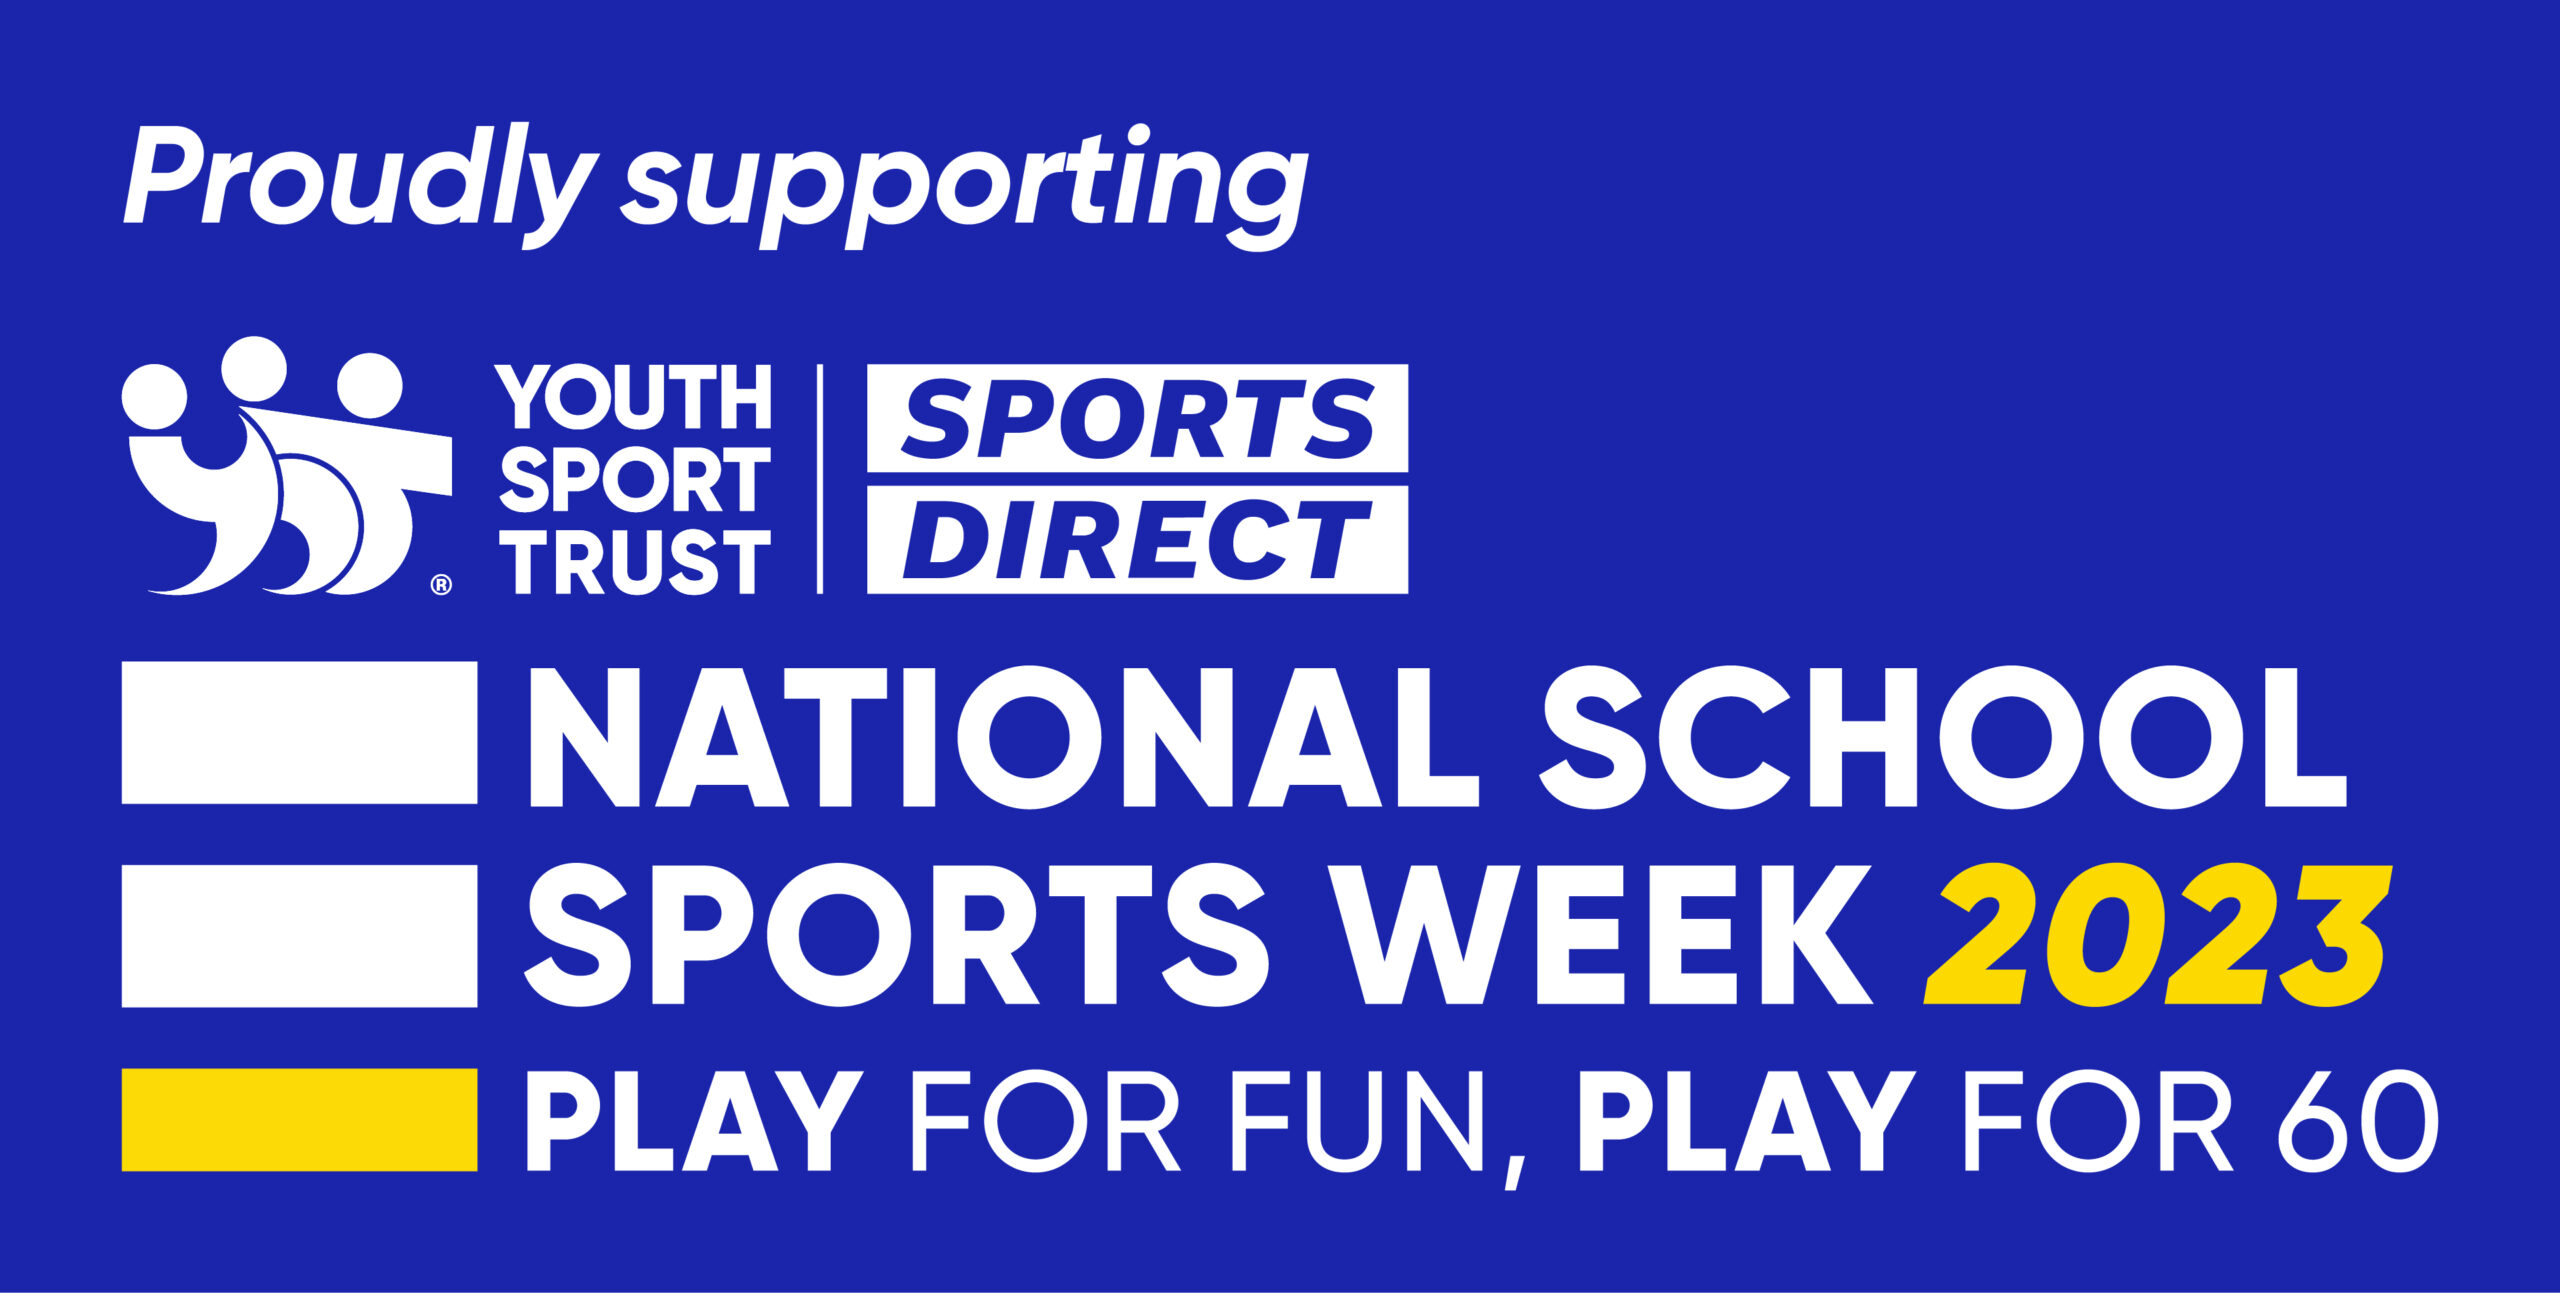 #PledgeToPlay – Sign up for National School Sports Week